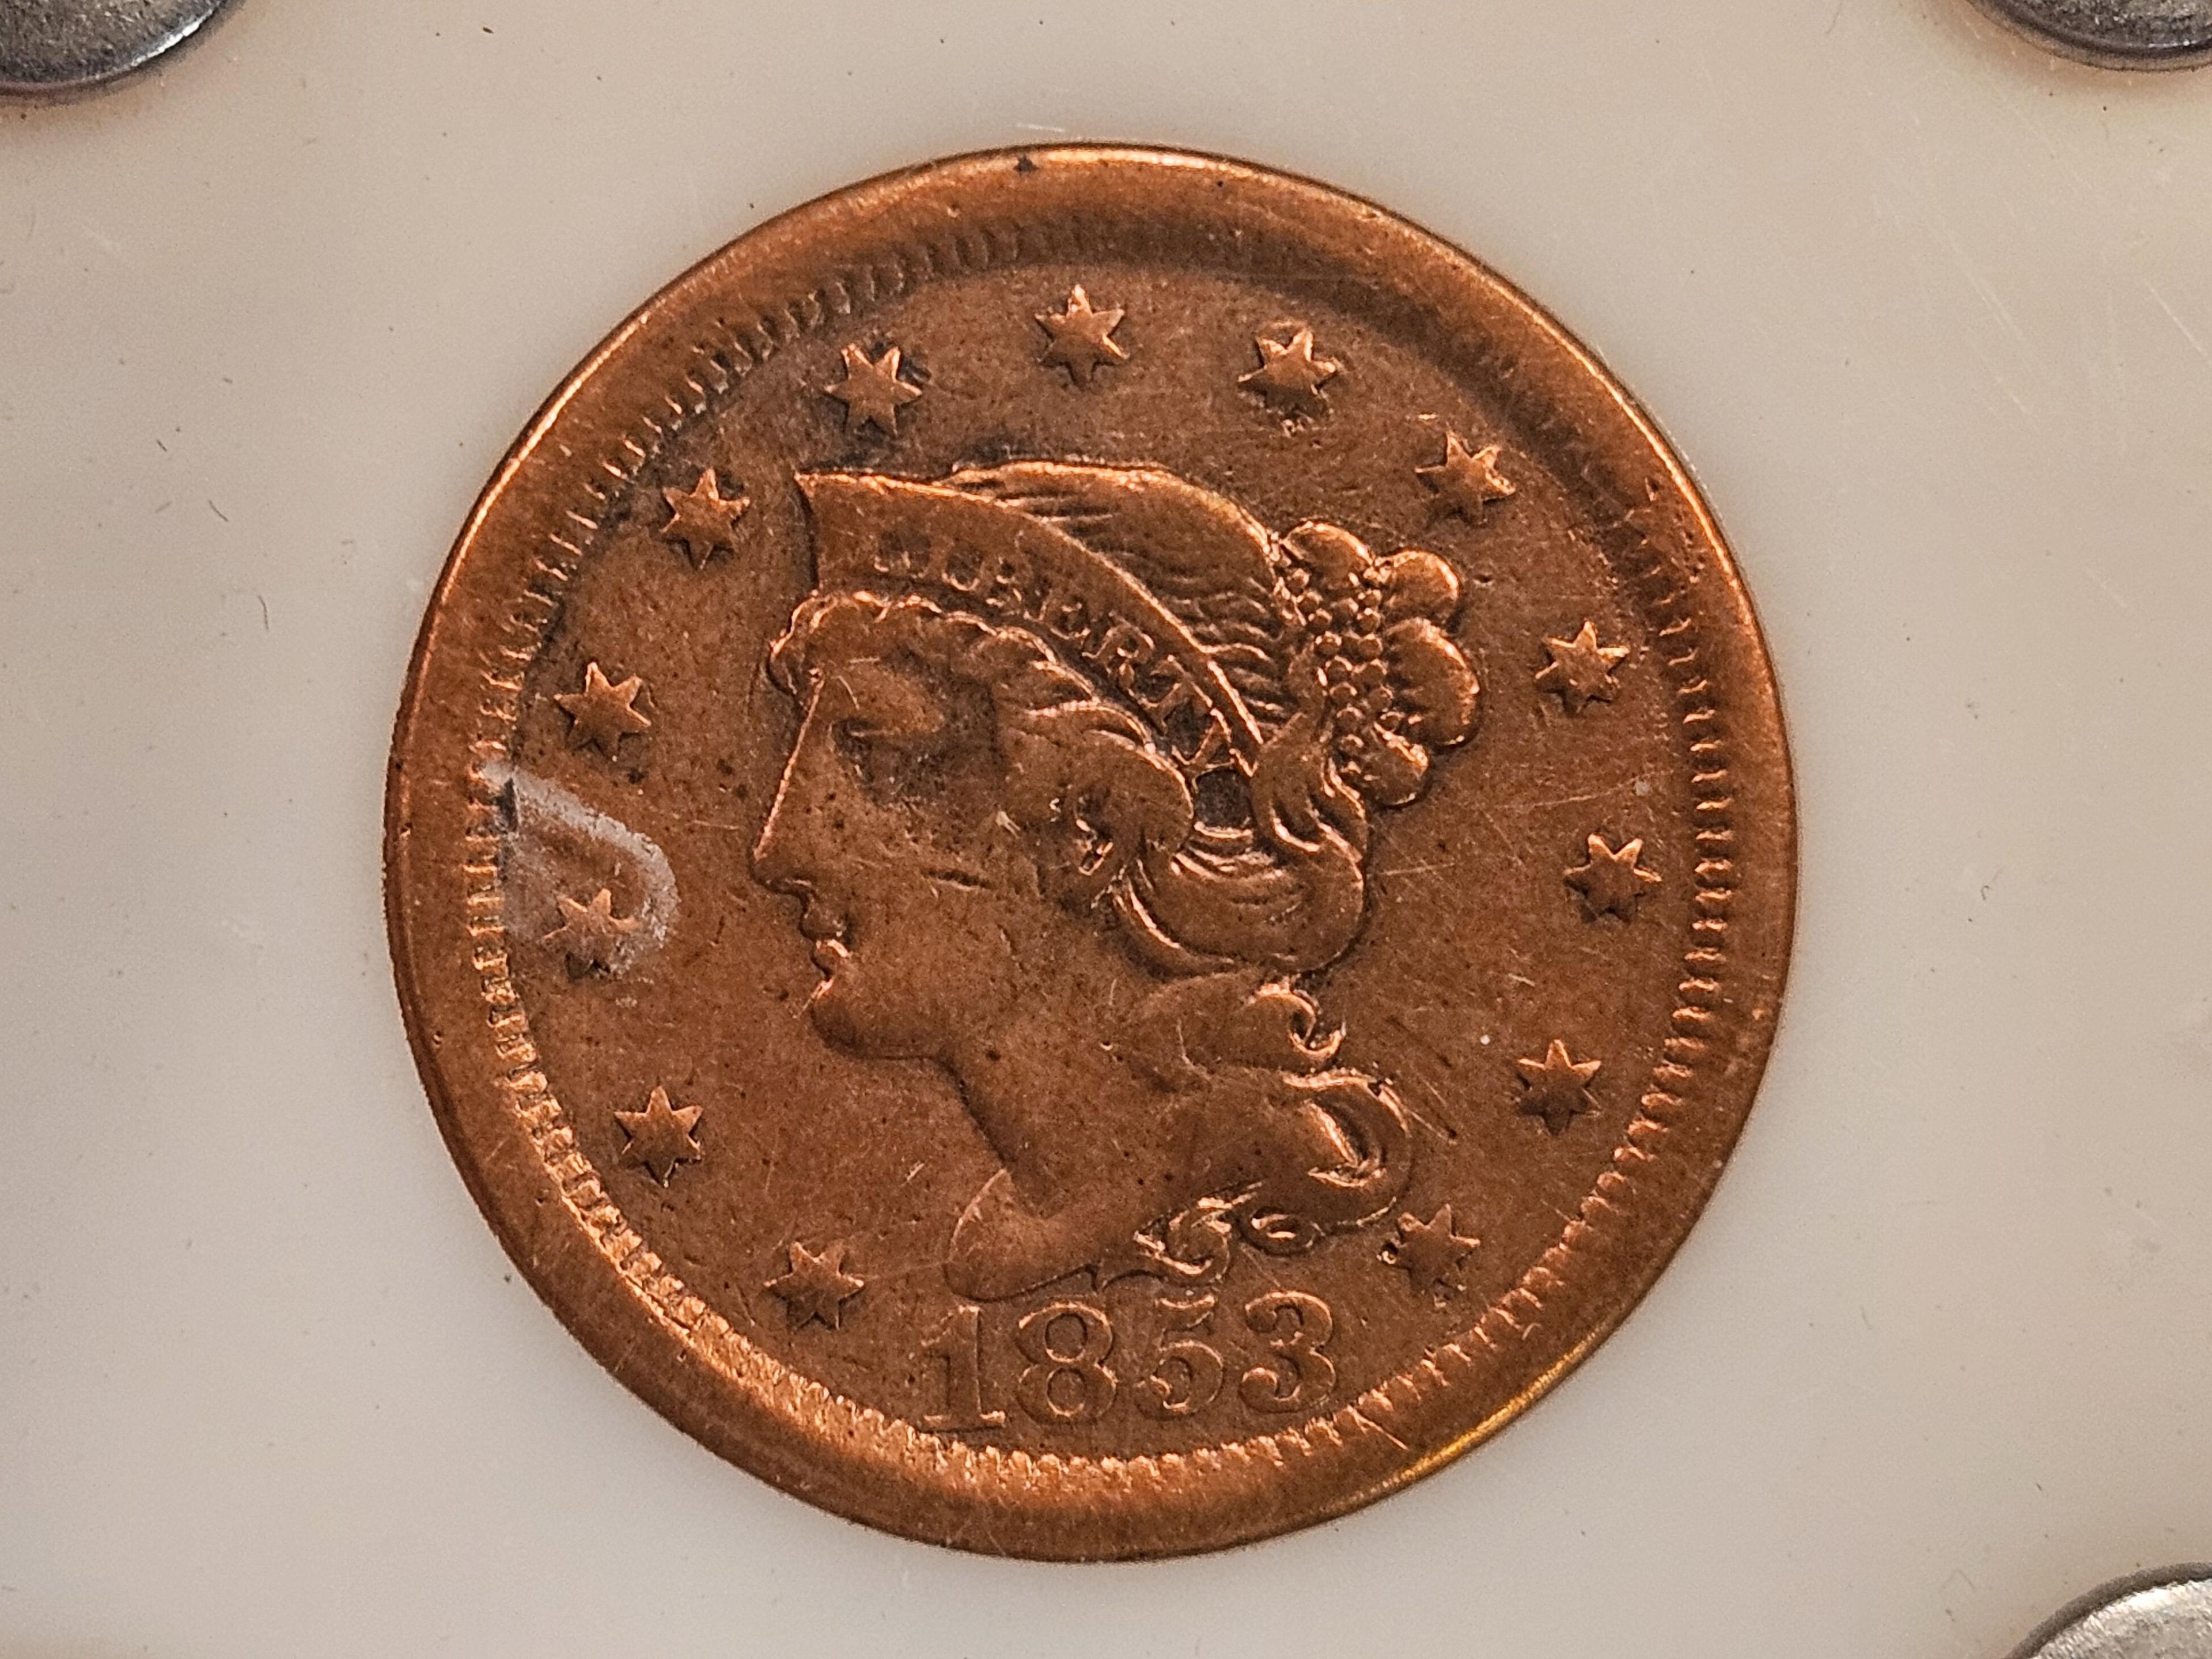 Four BU Memorial Rolls and a 1853 Large Cent